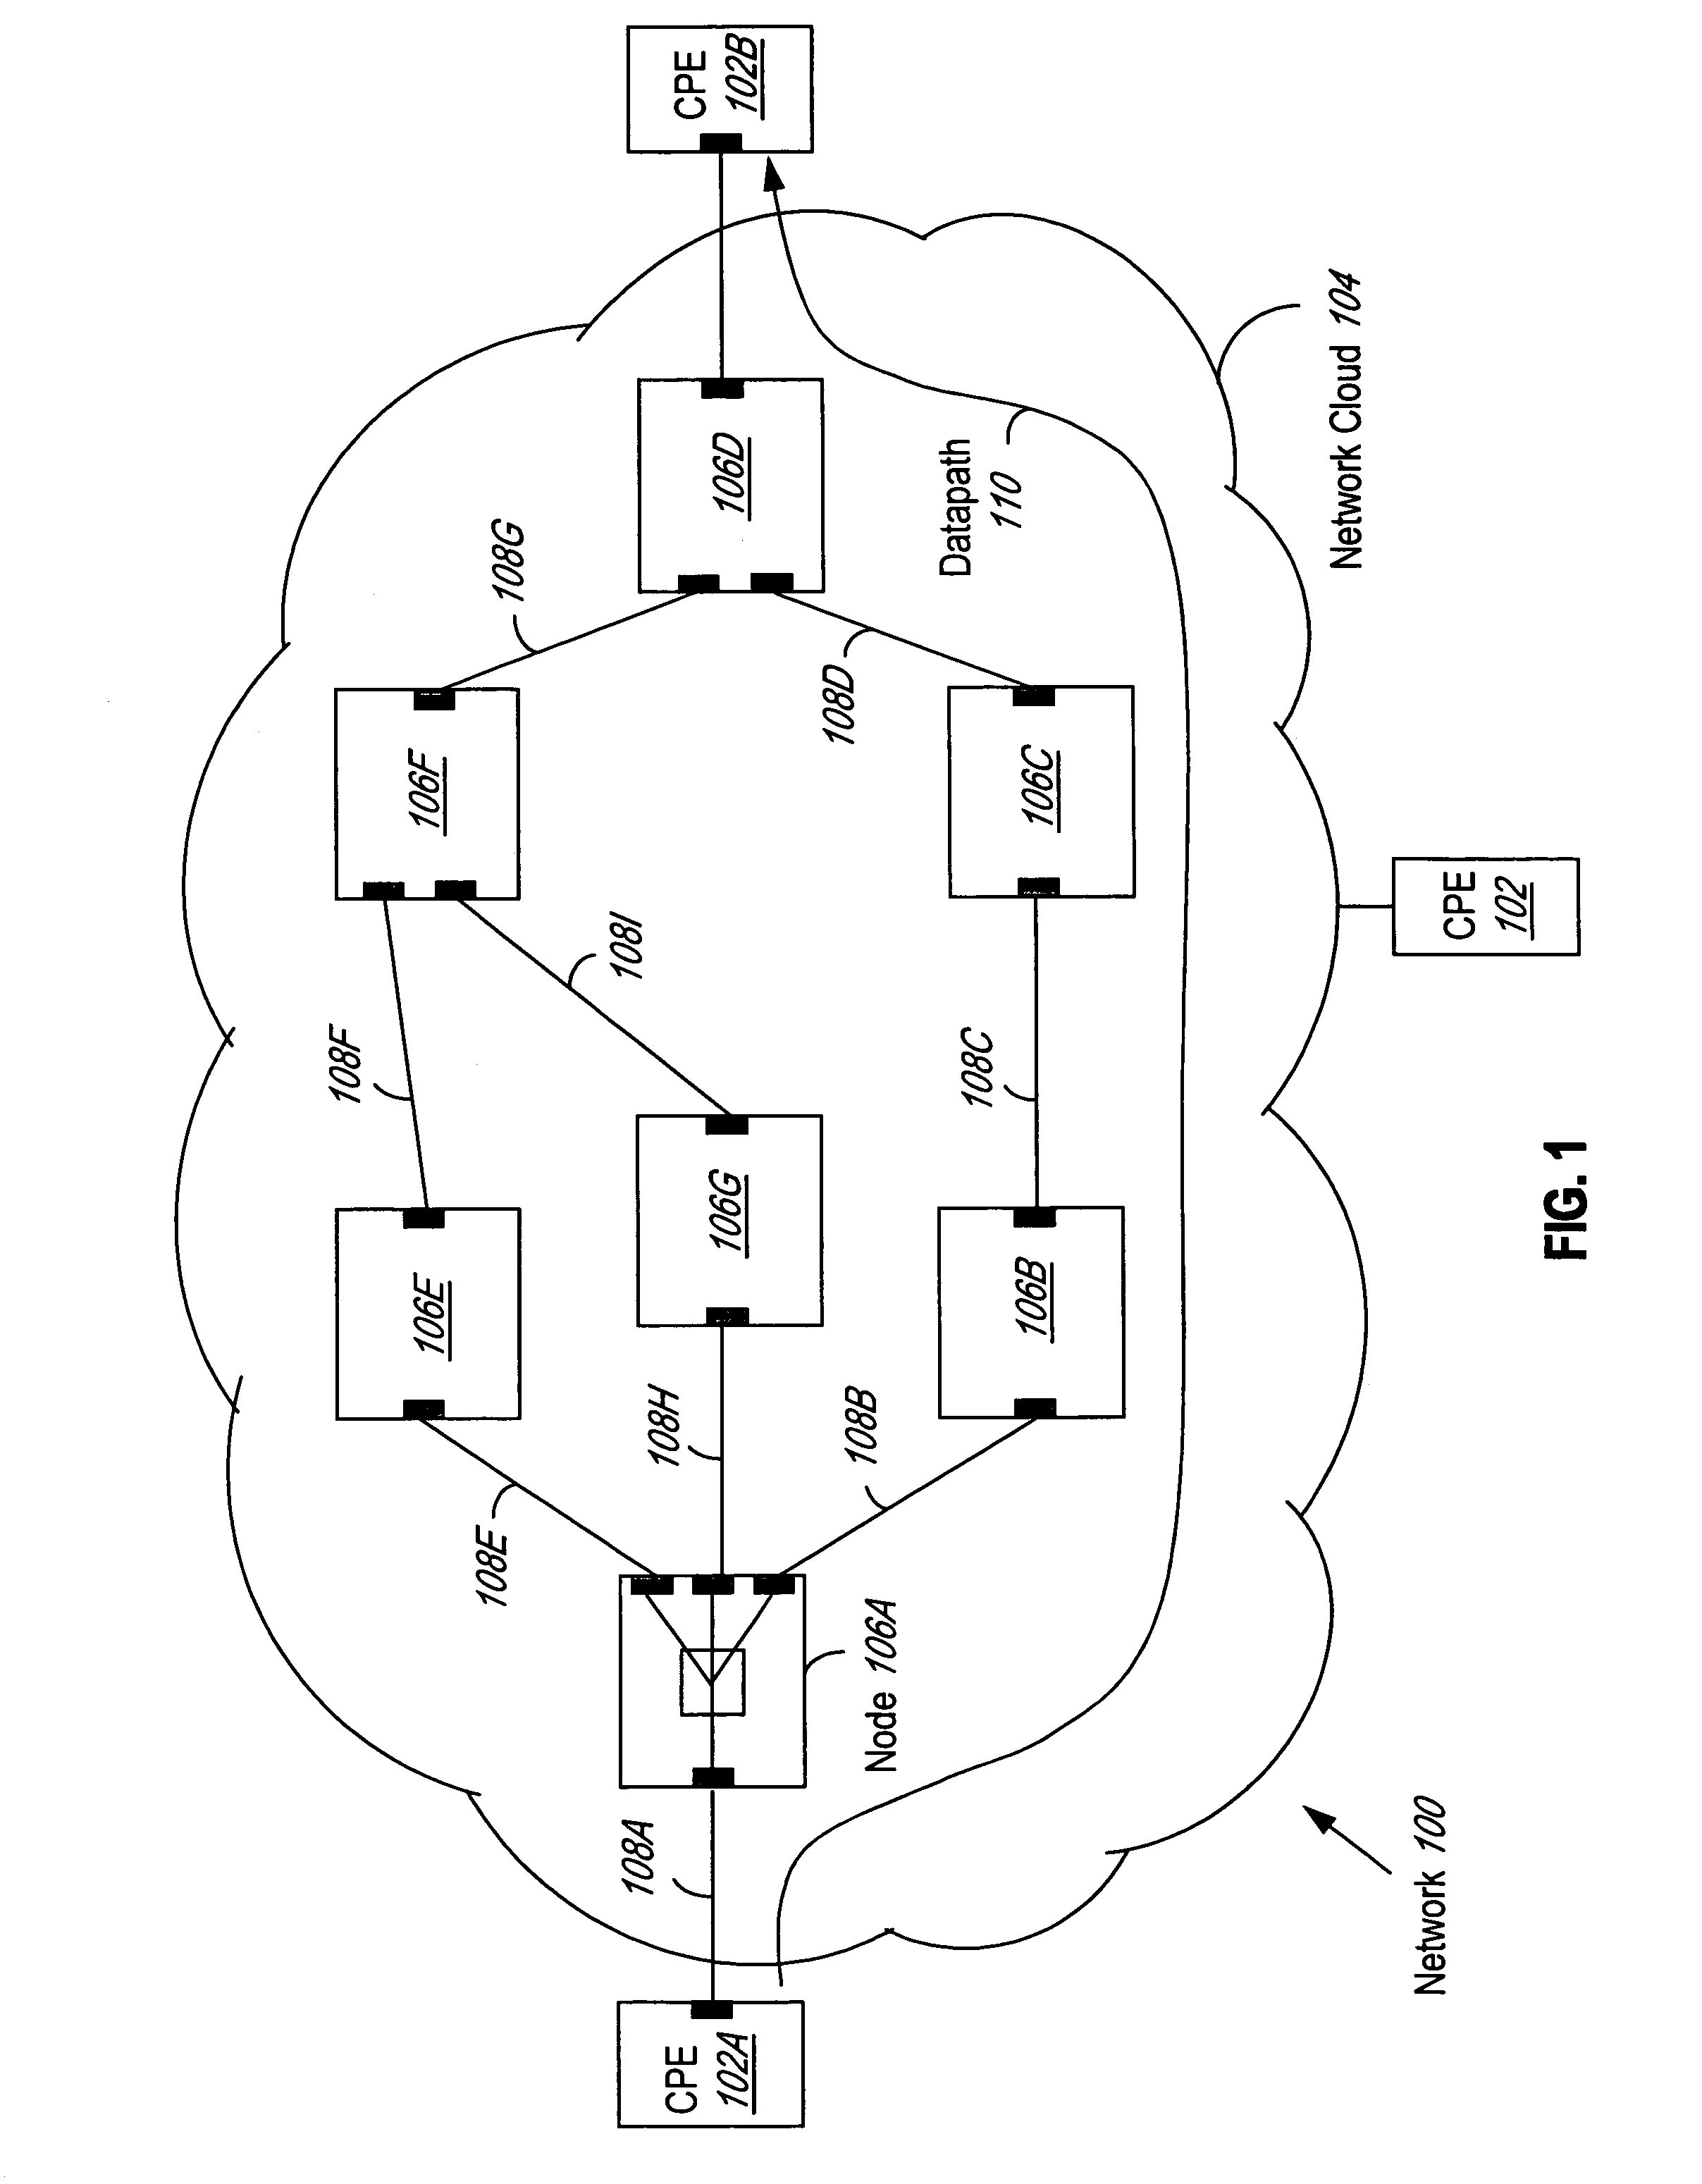 System and method for parallel connection selection in a communication network